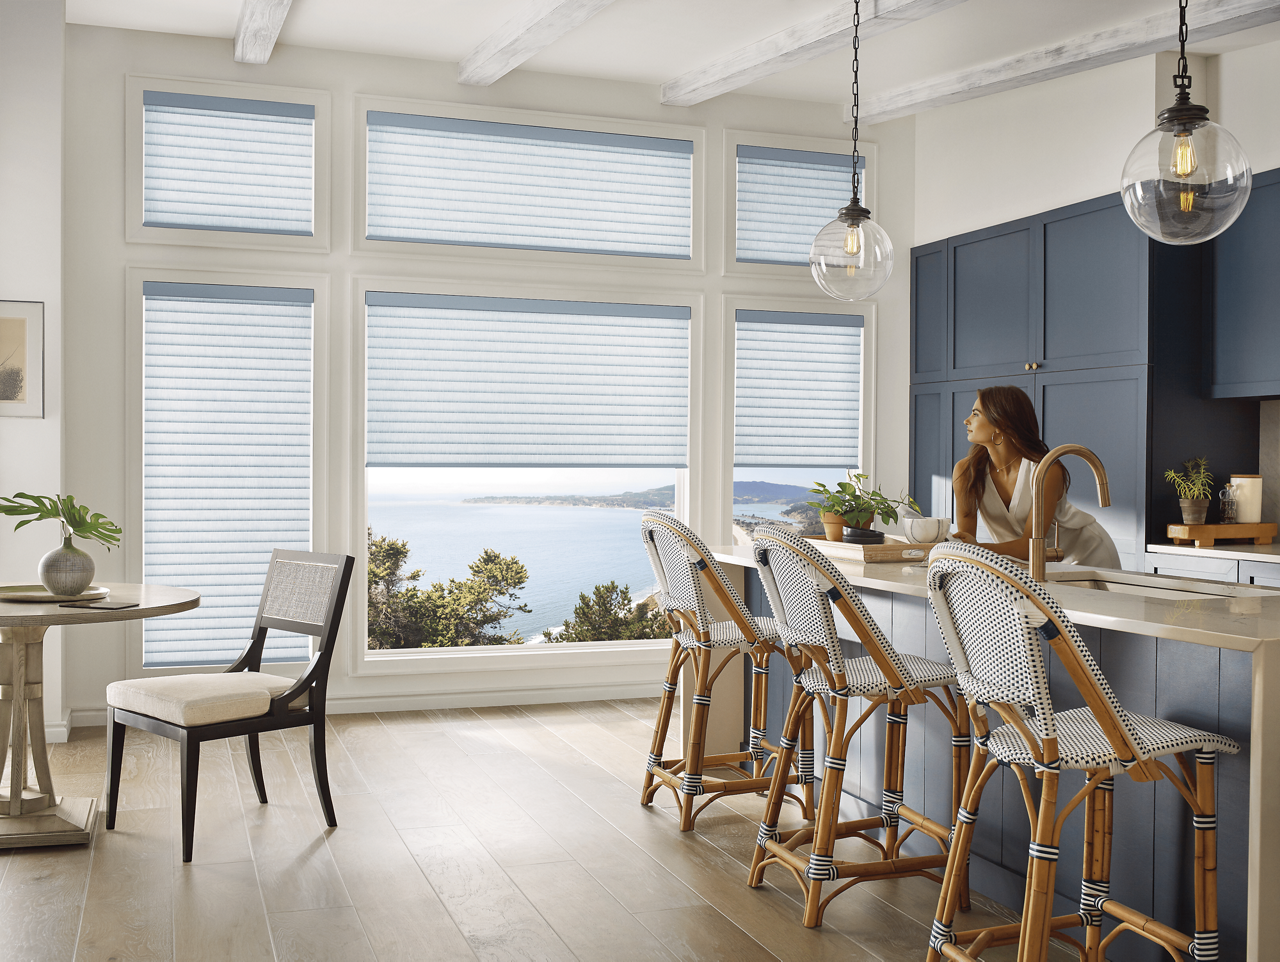 A woman in a kitchen gazing out large picture windows with Sonnette PowerView Shades.